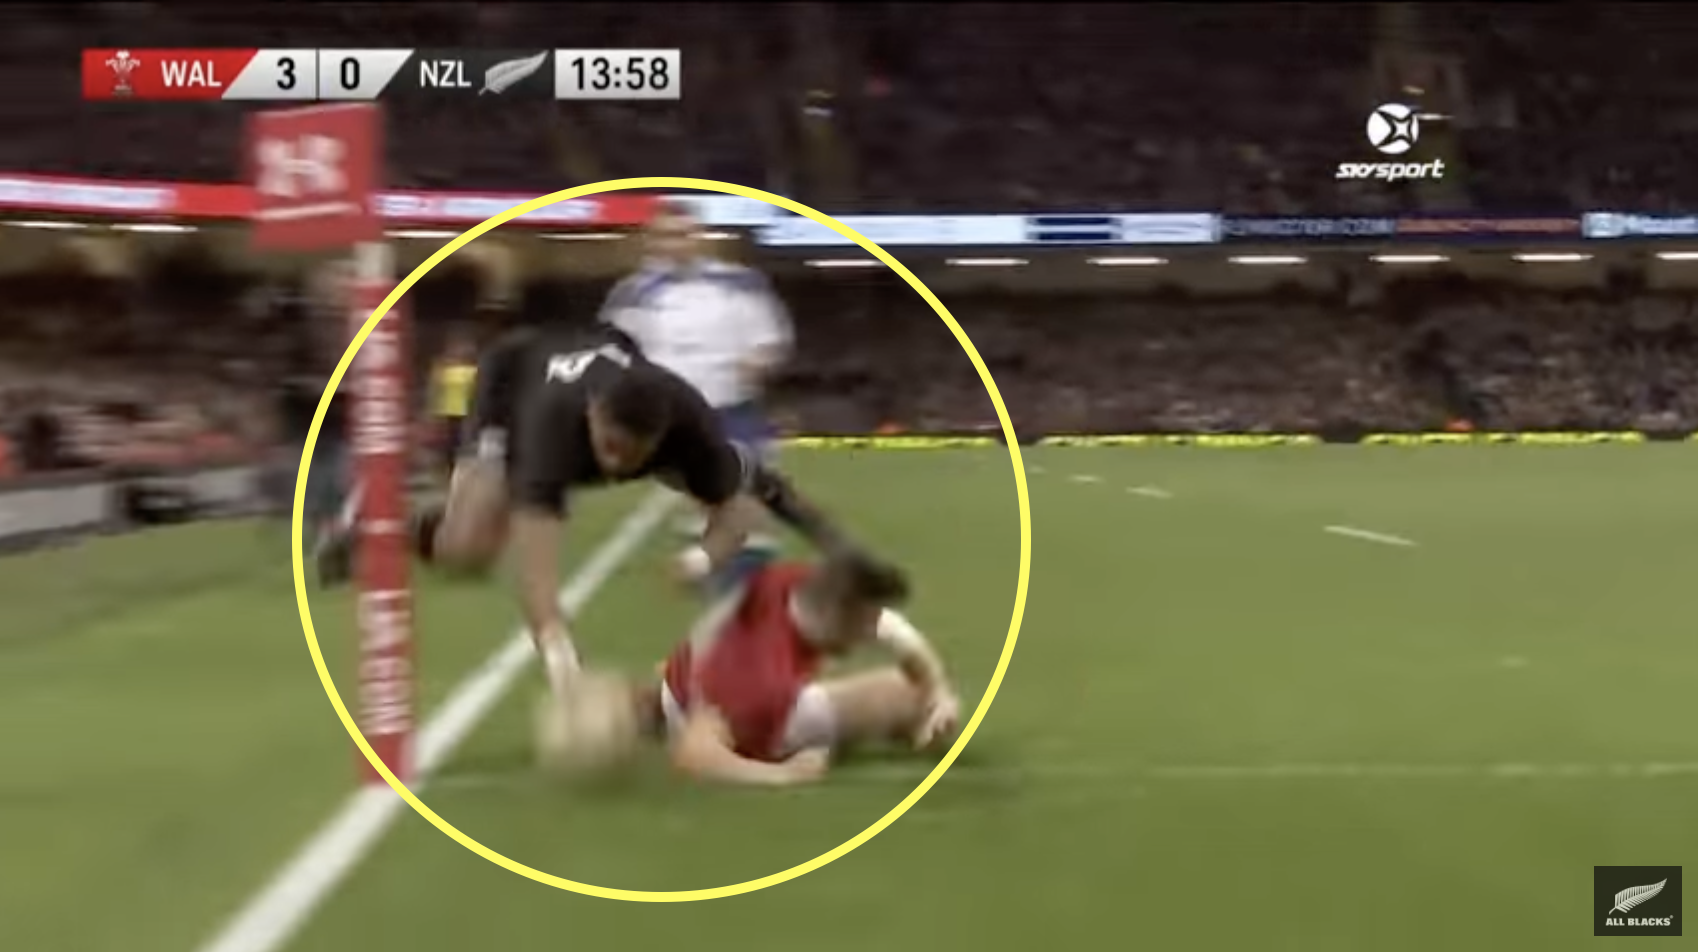 The All Blacks' wonder try from their last match against Wales in Cardiff